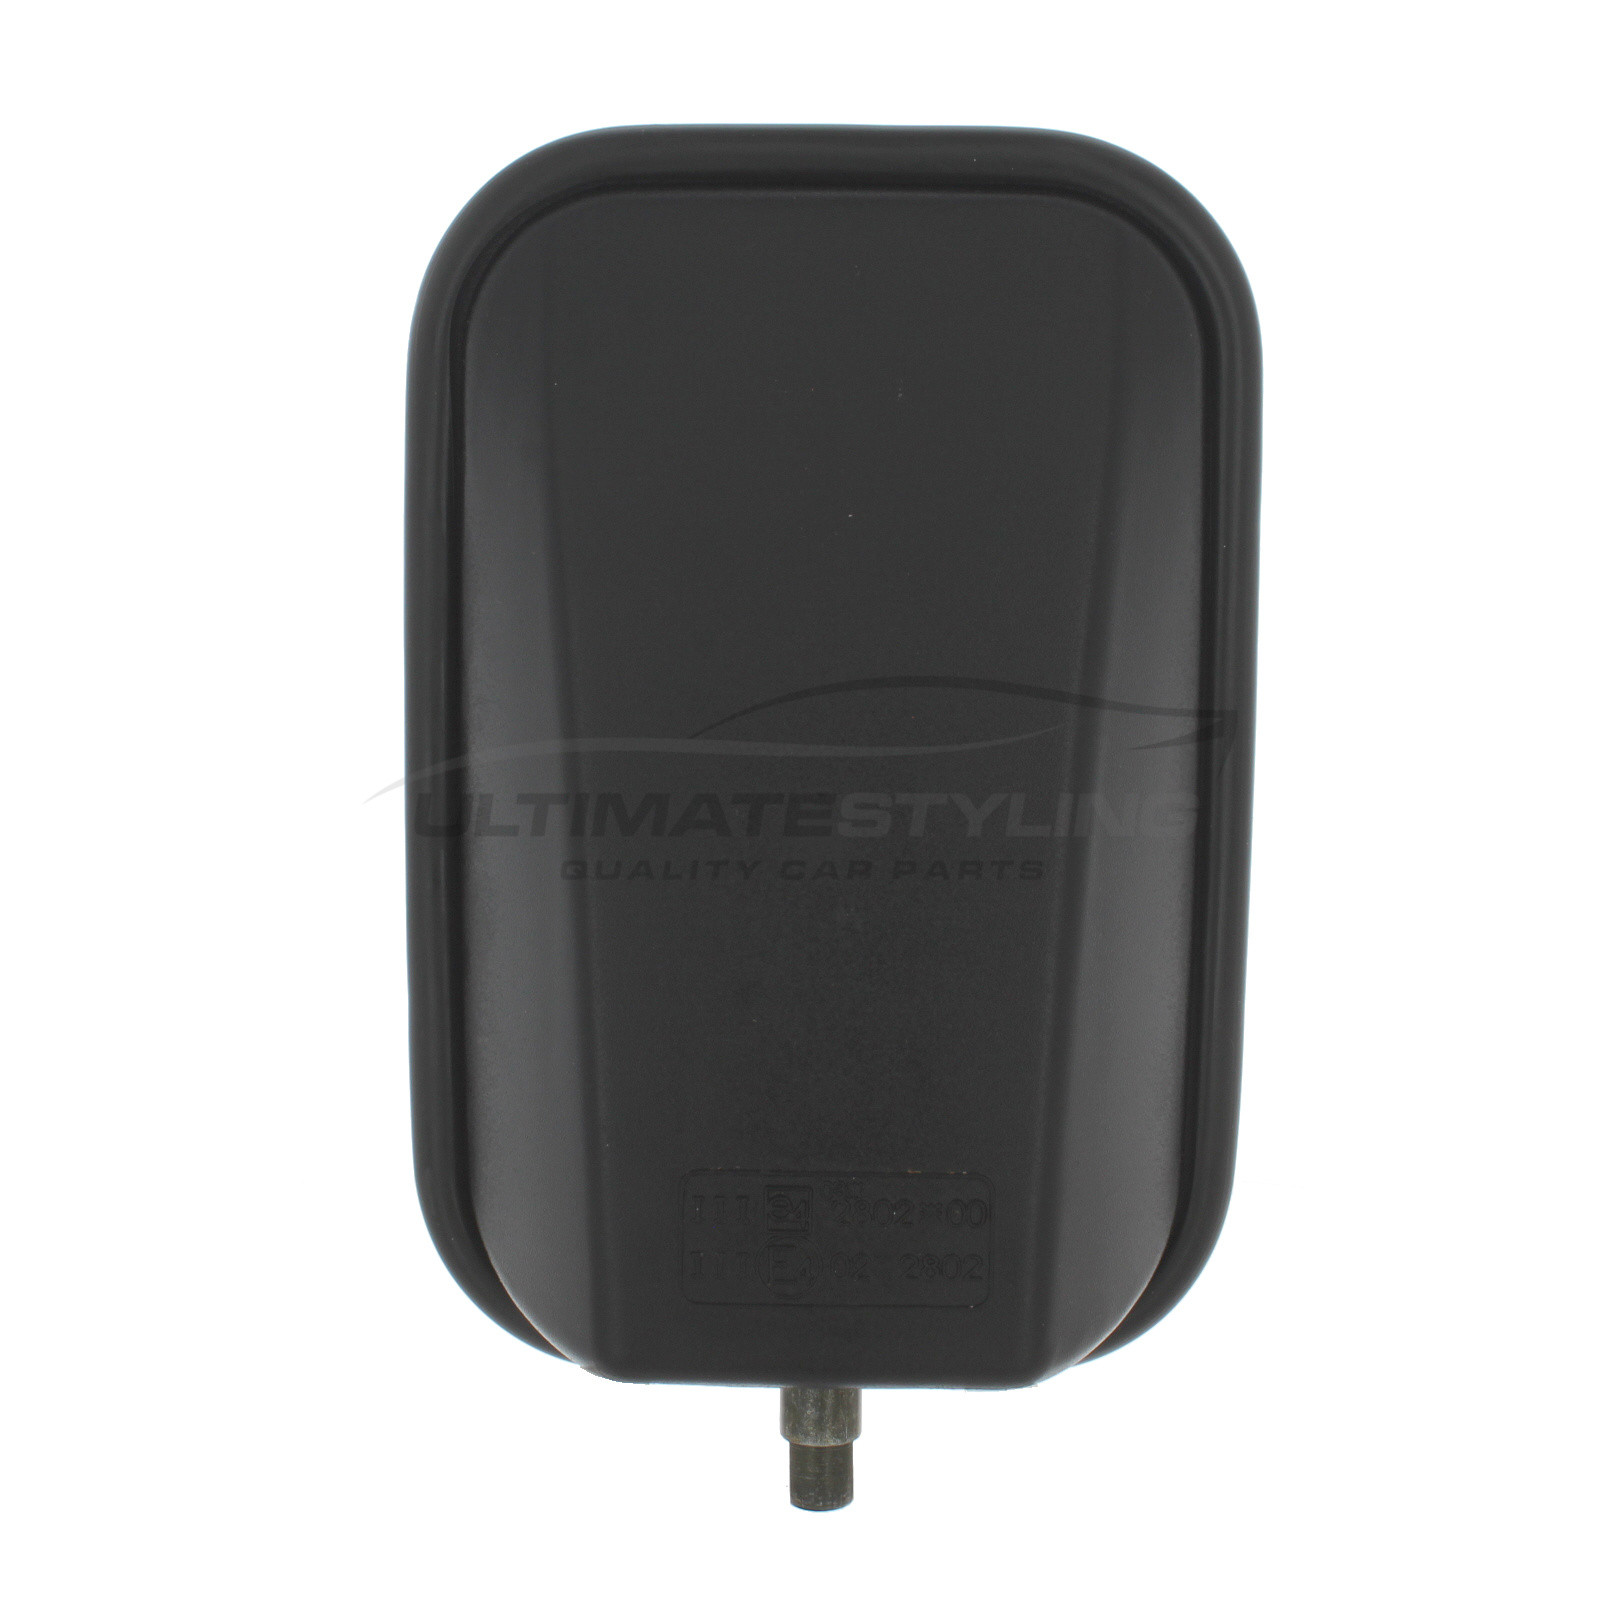 Land Rover Defender / Land Rover Wing Mirror / Door Mirror - Universal (LH or RH) - Manual adjustment - Non-Heated Glass - Black